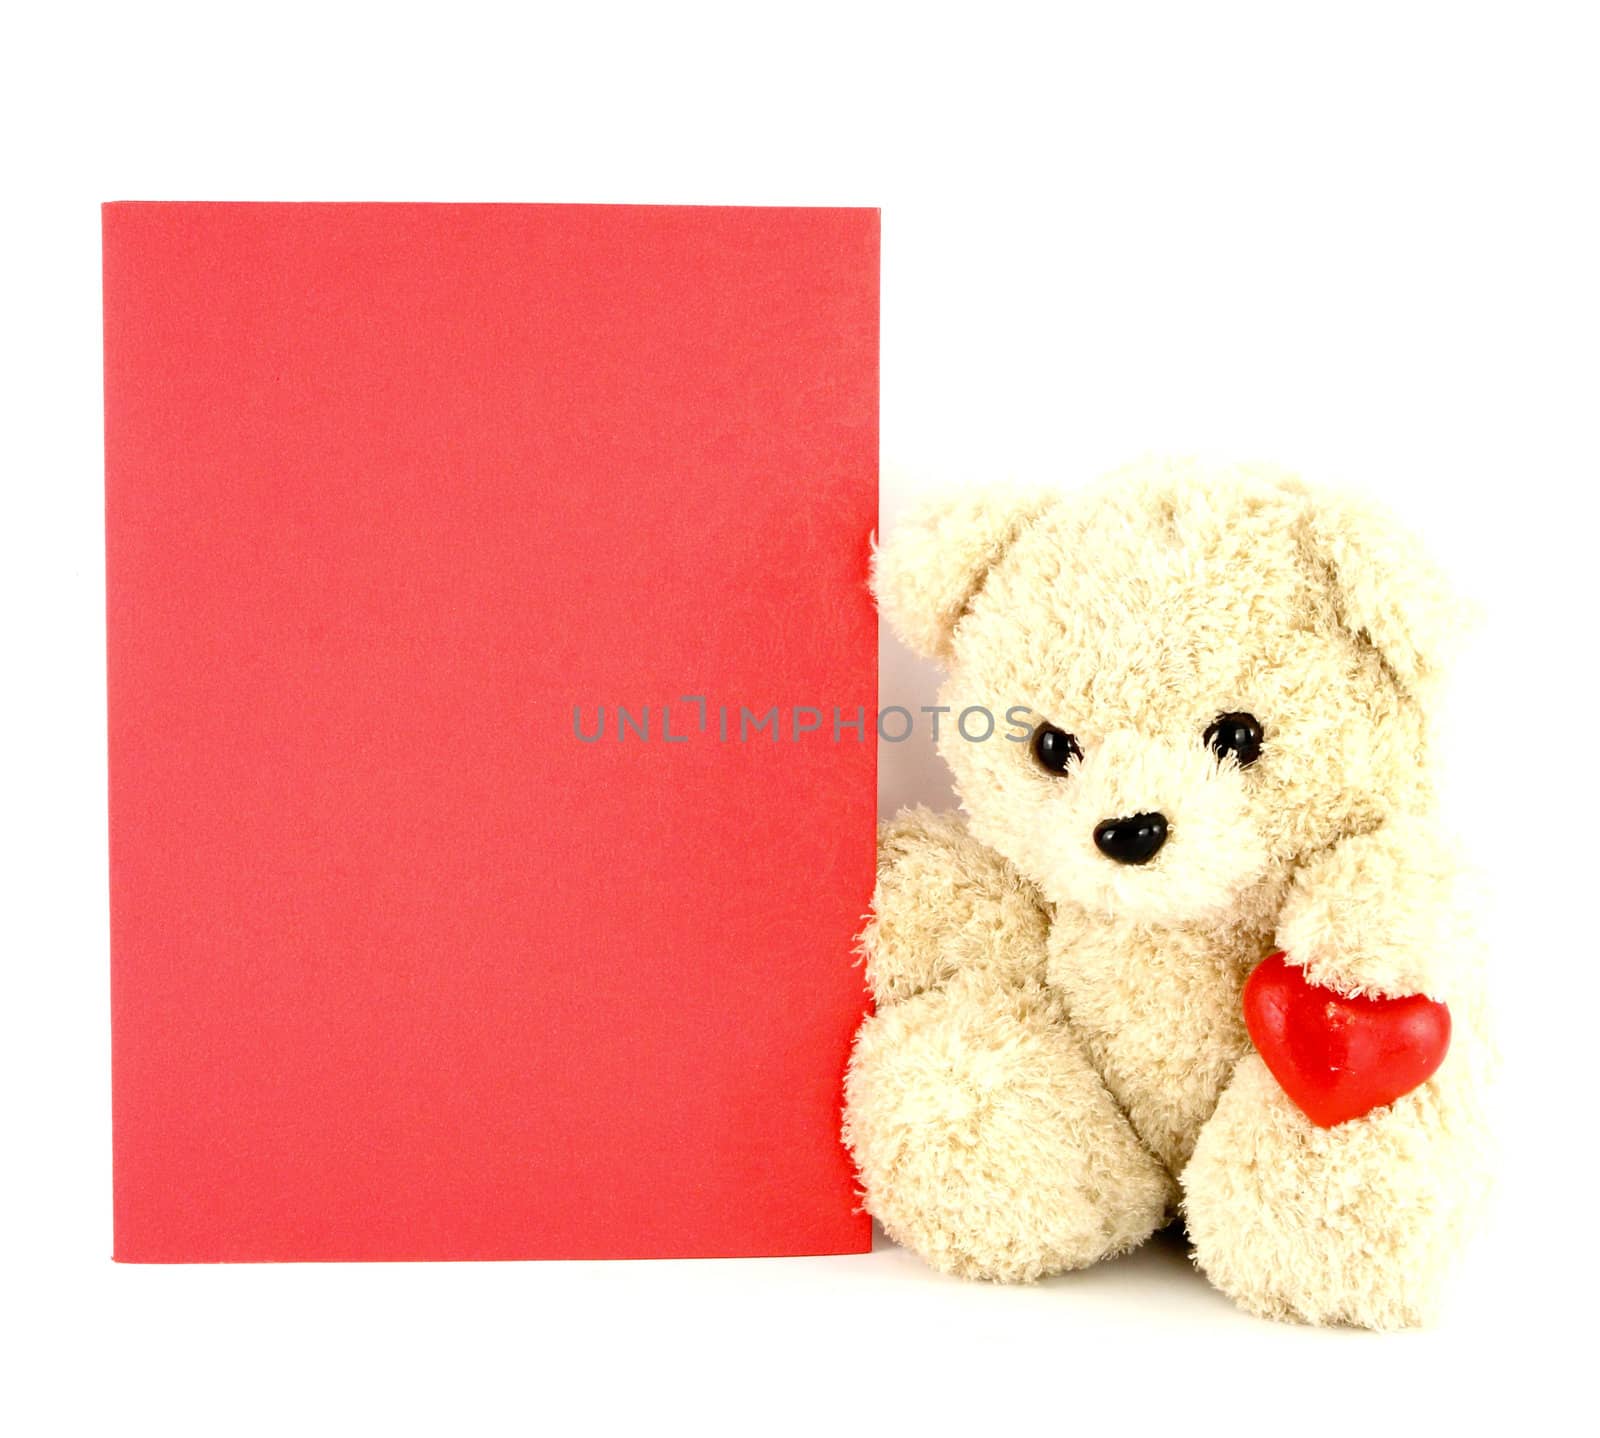 teddy bear toy with a blank card, isolated on white background by geargodz